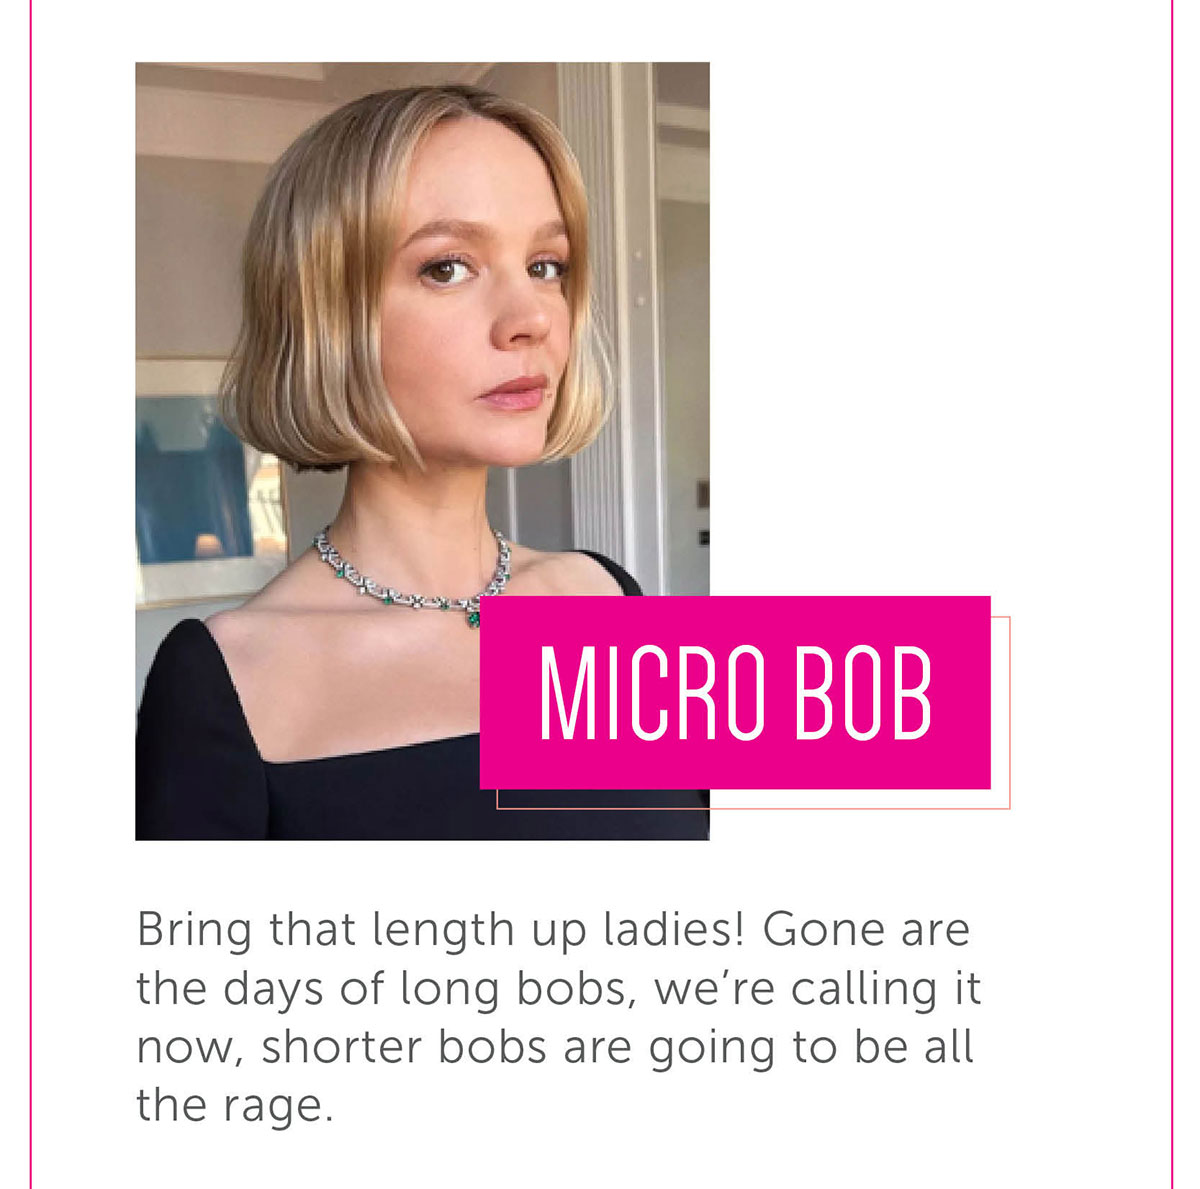 Micro bob Bring that length up ladies! Gone are the days of long bobs, we’re calling it now, shorter bobs are going to be all the rage.